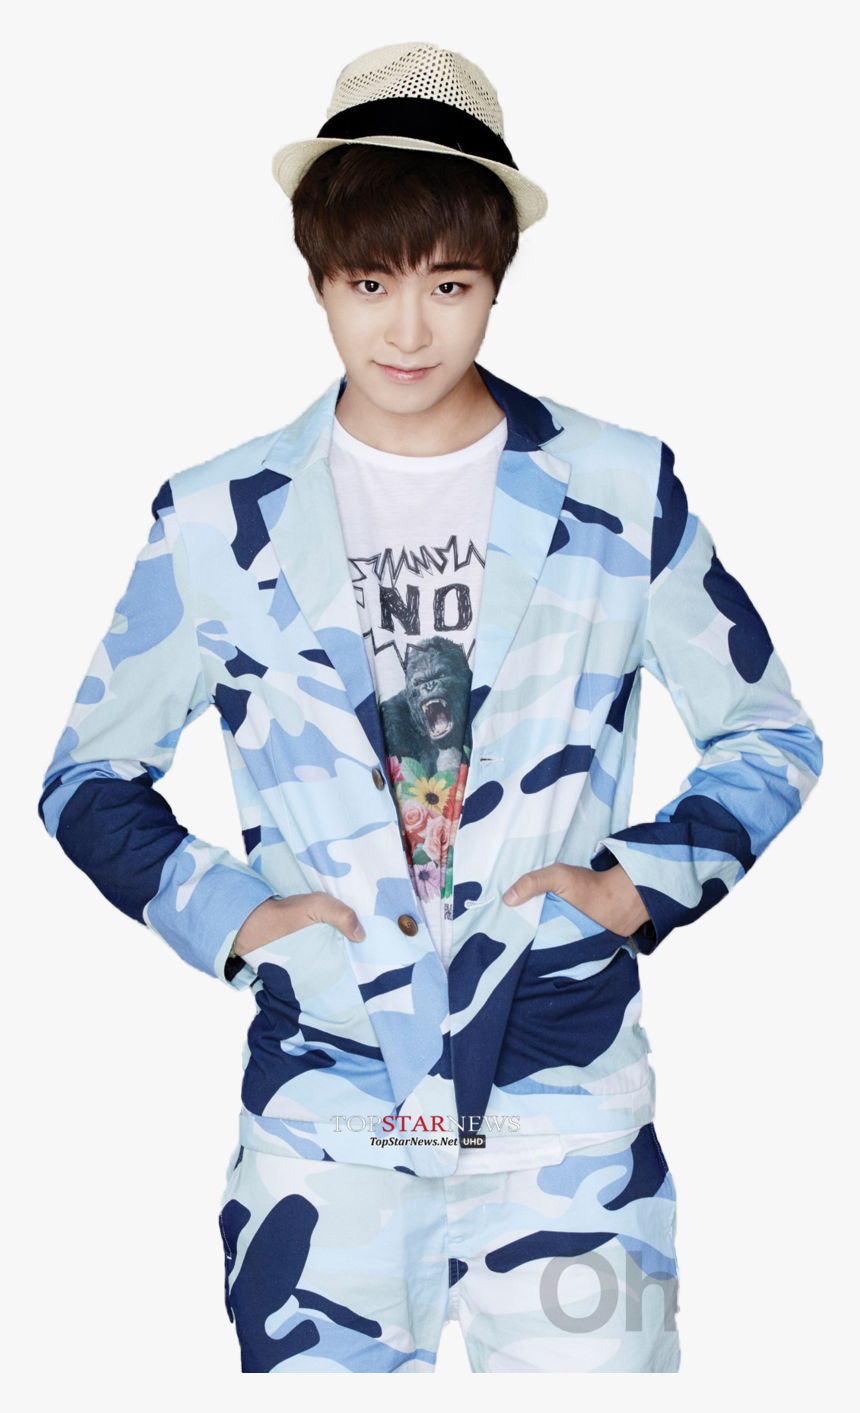 Vampire University Wiki - Youngjae Got7 Png, Transparent Png, Free Download